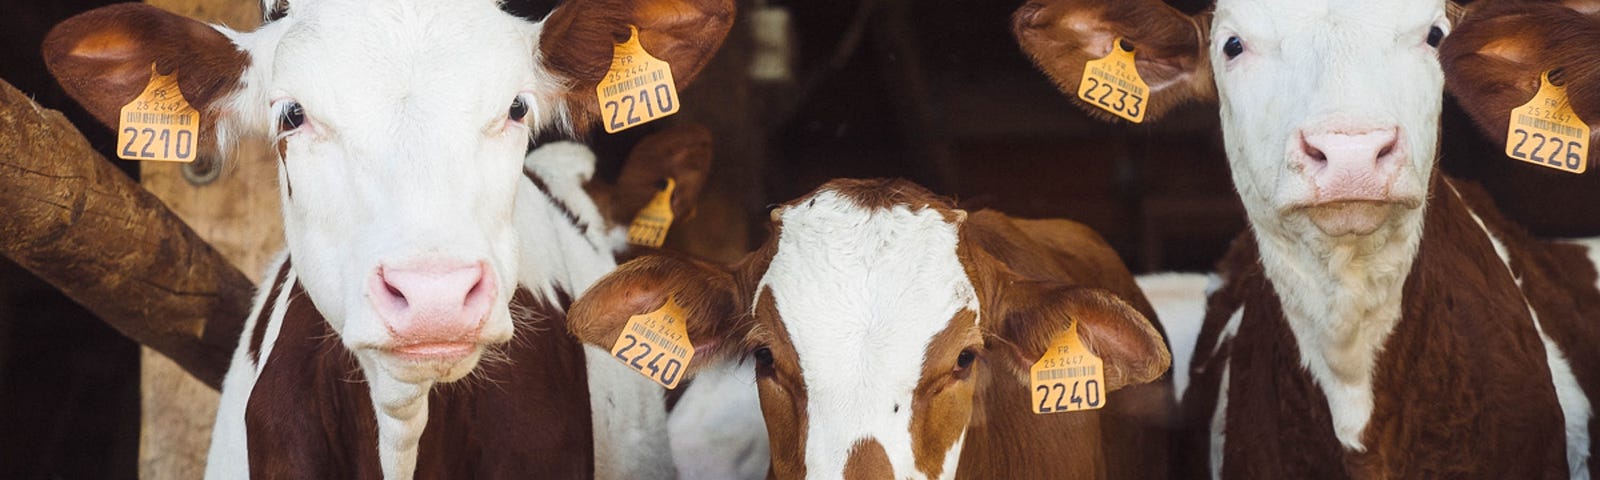 Close up of three brown and white jersey cows with cute expressions looking directly at the camera with yellow numbered tags clipped on their ears